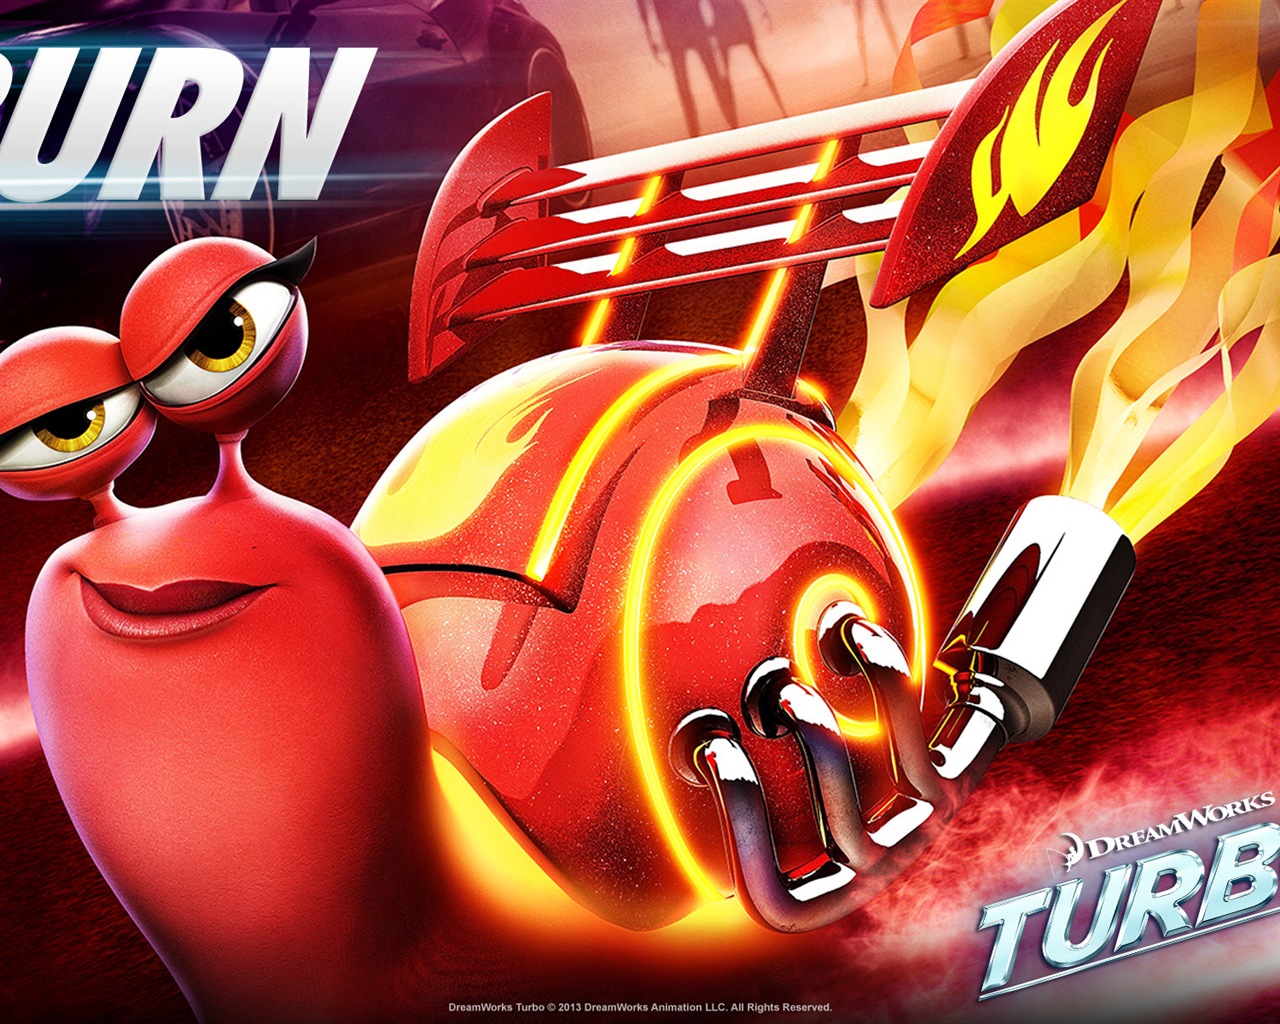 Turbo 3D movie HD wallpapers #7 - 1280x1024